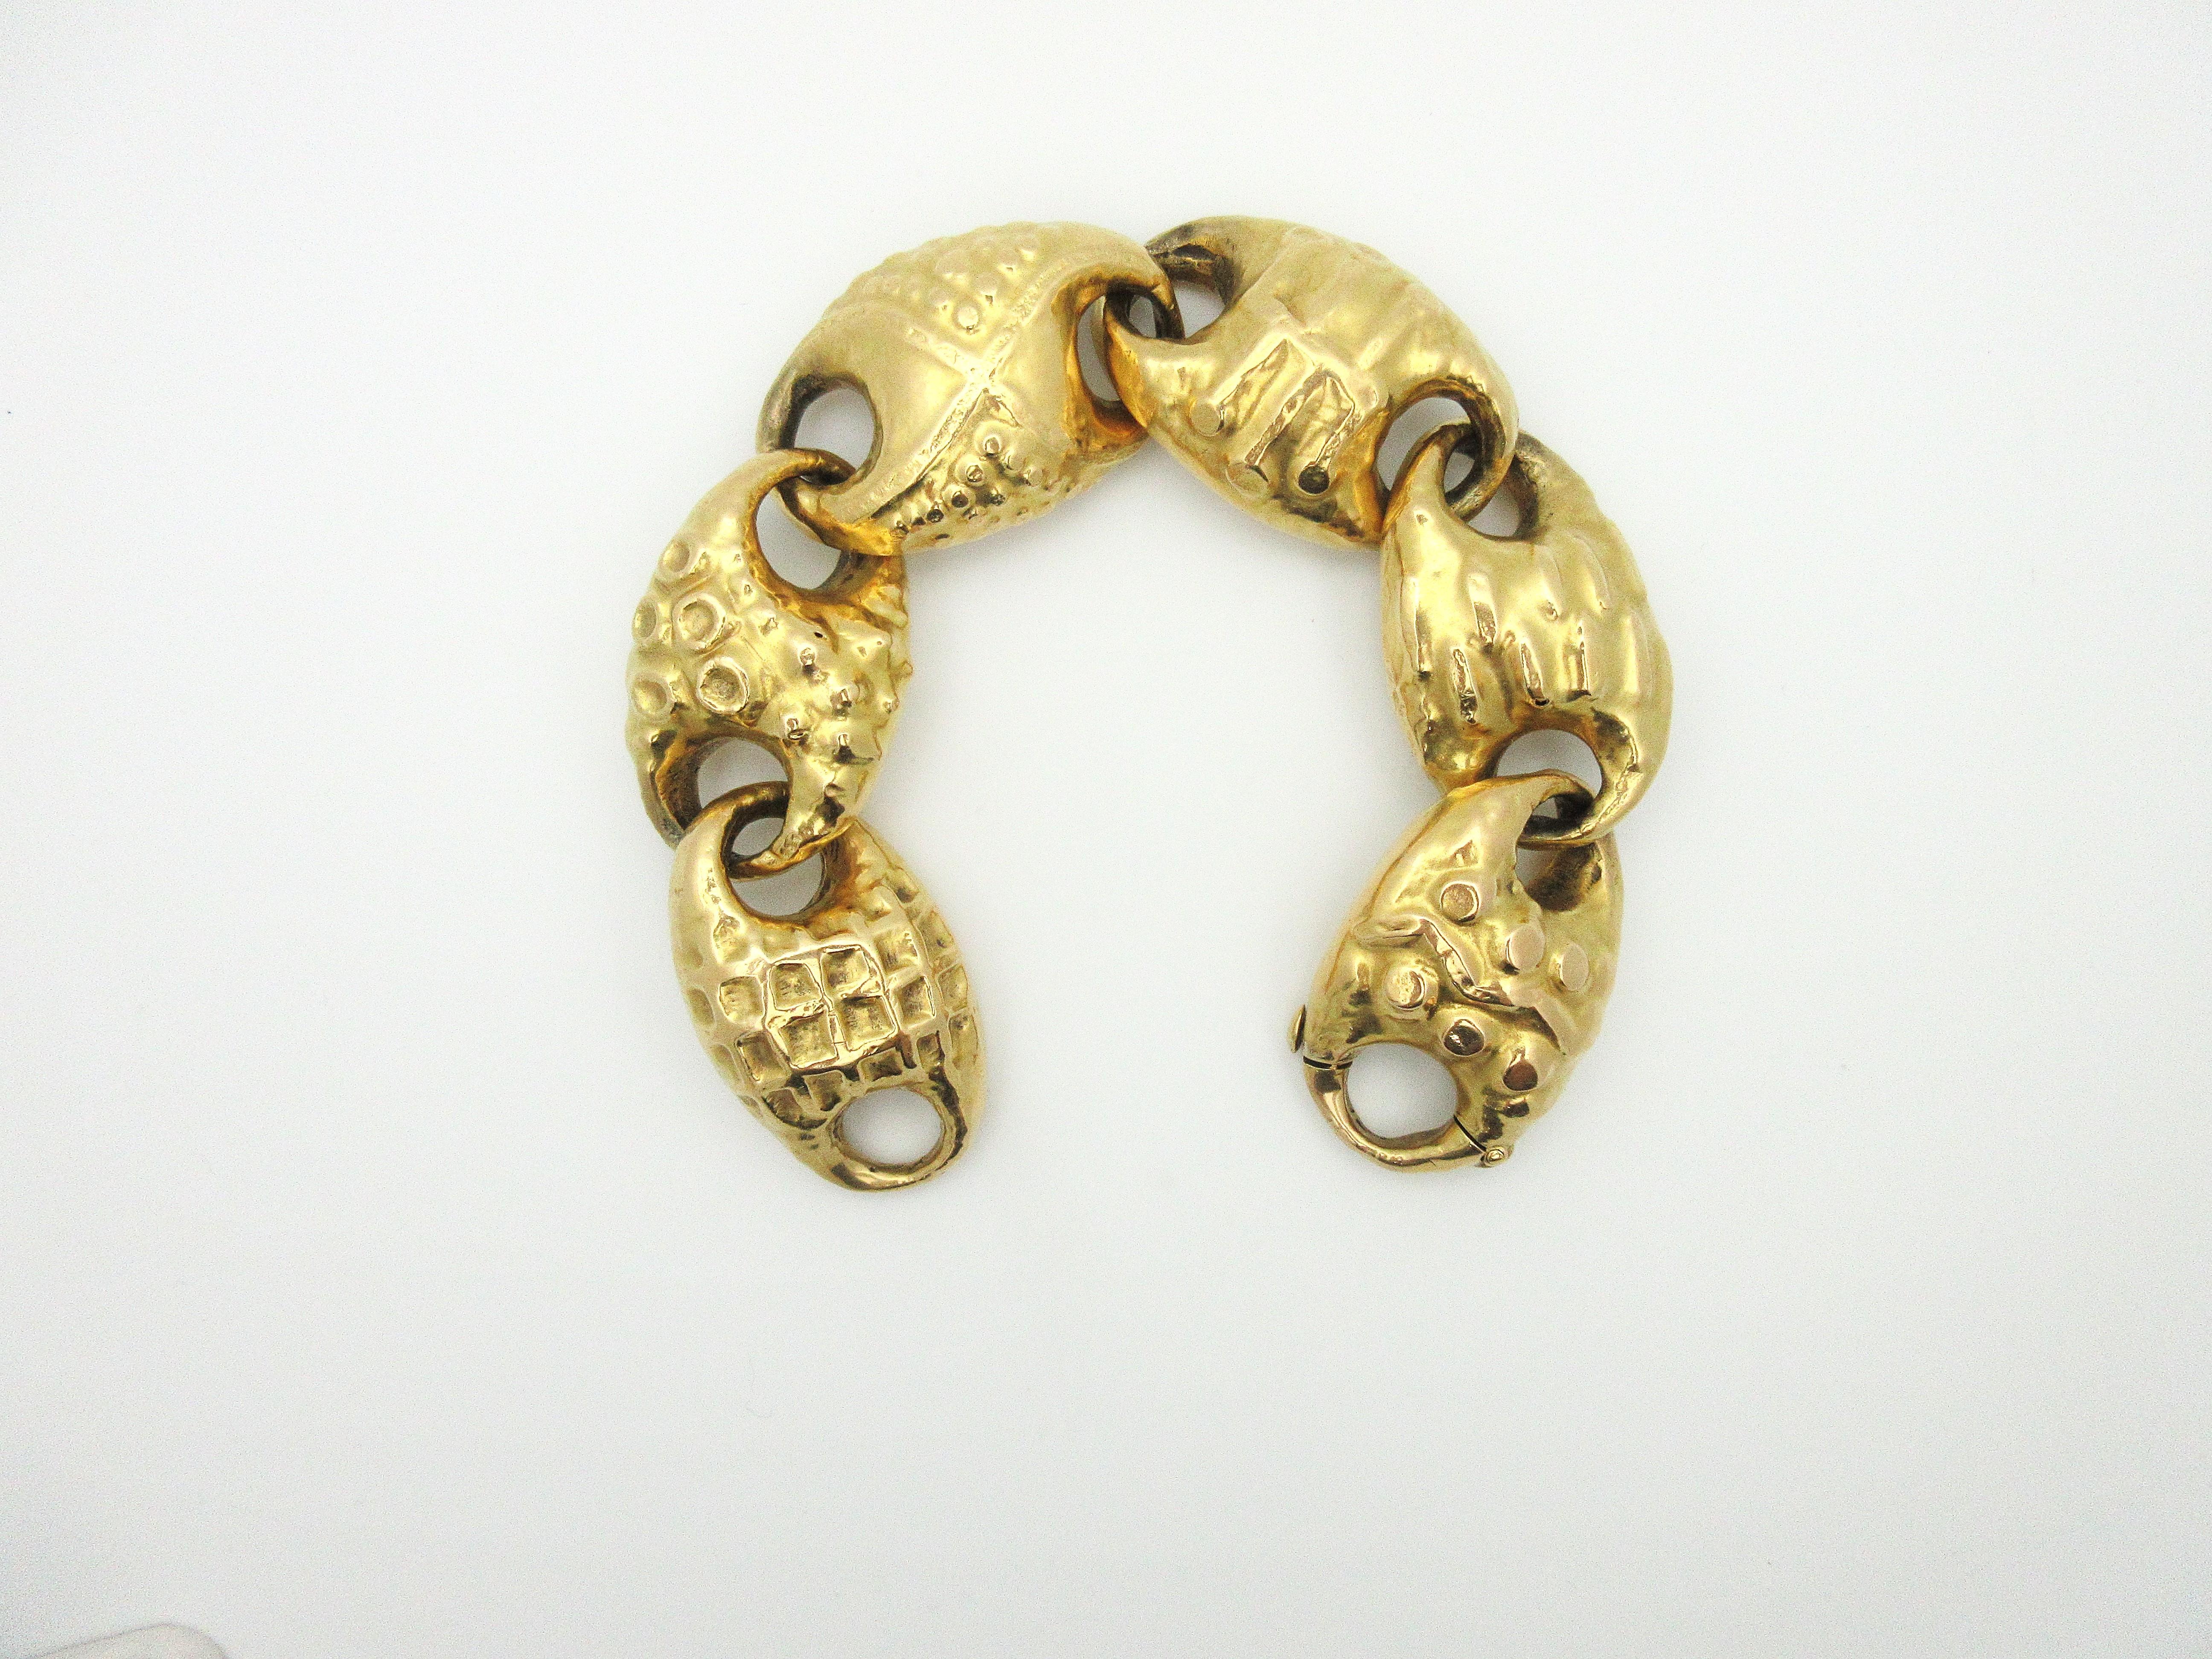 This gorgeous bracelet from the 1950s is a work of art!  During the late 1940s, Mario Masenza ignored tradition by inviting his artist friends to make jewelry for his elaborate baroque boutique in Rome, Italy.    Franco Cannilla was one such artist